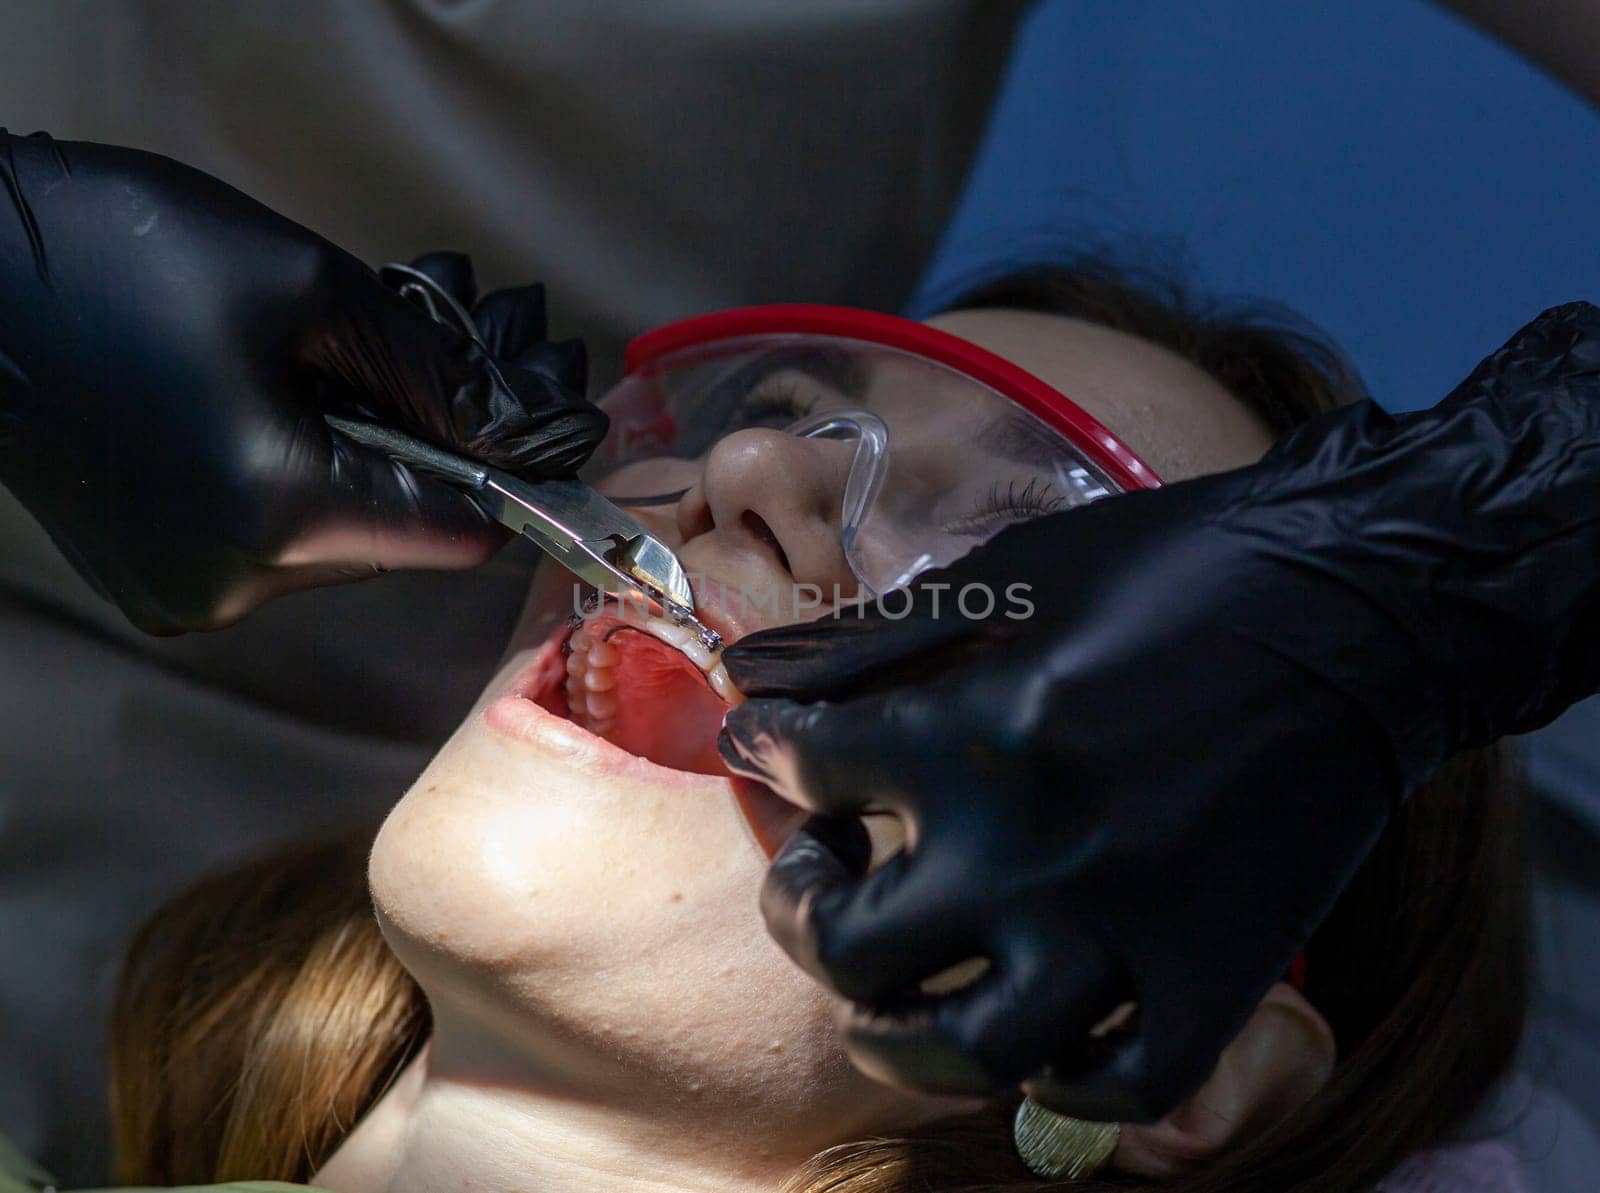 The process of removing braces. A beautiful woman in protective glasses in a dental chair during the procedure of removing braces from teeth. Dentist and assistant working.